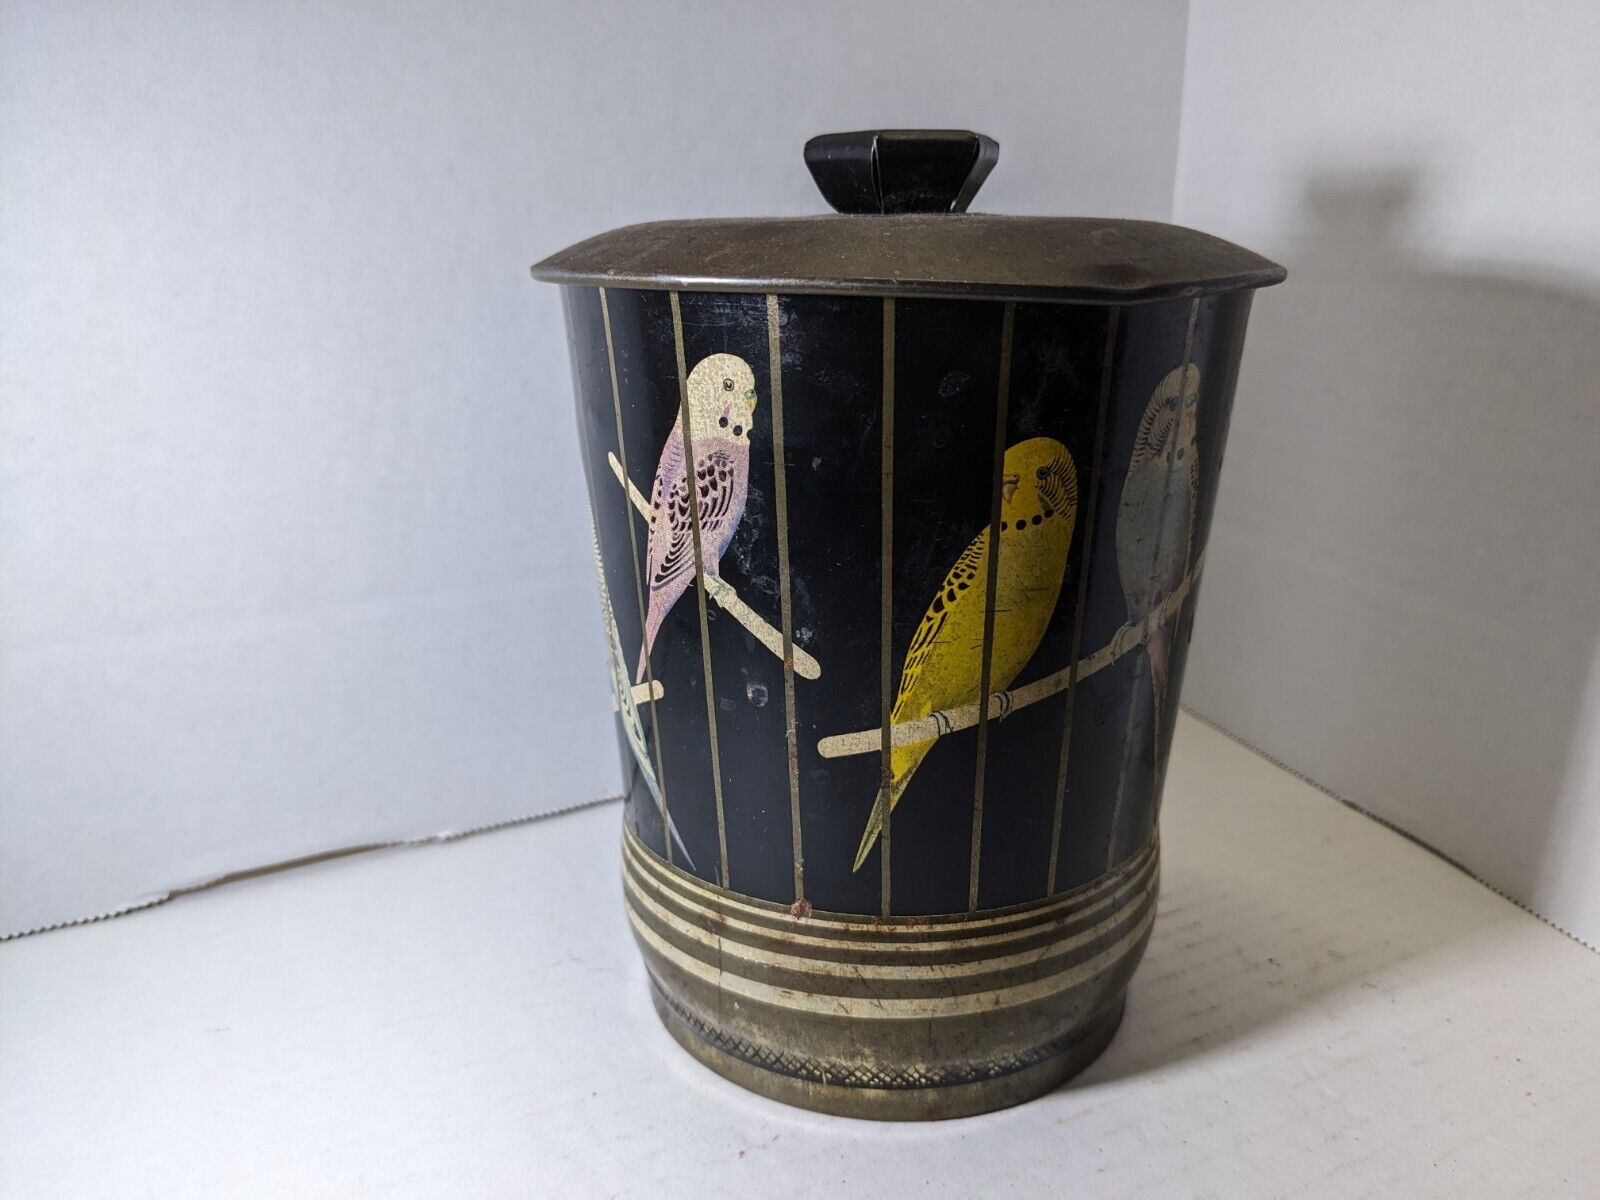 1920s Parakeet/Budgies Ornate Tin Litho English Seed Lidded Container 6 inch